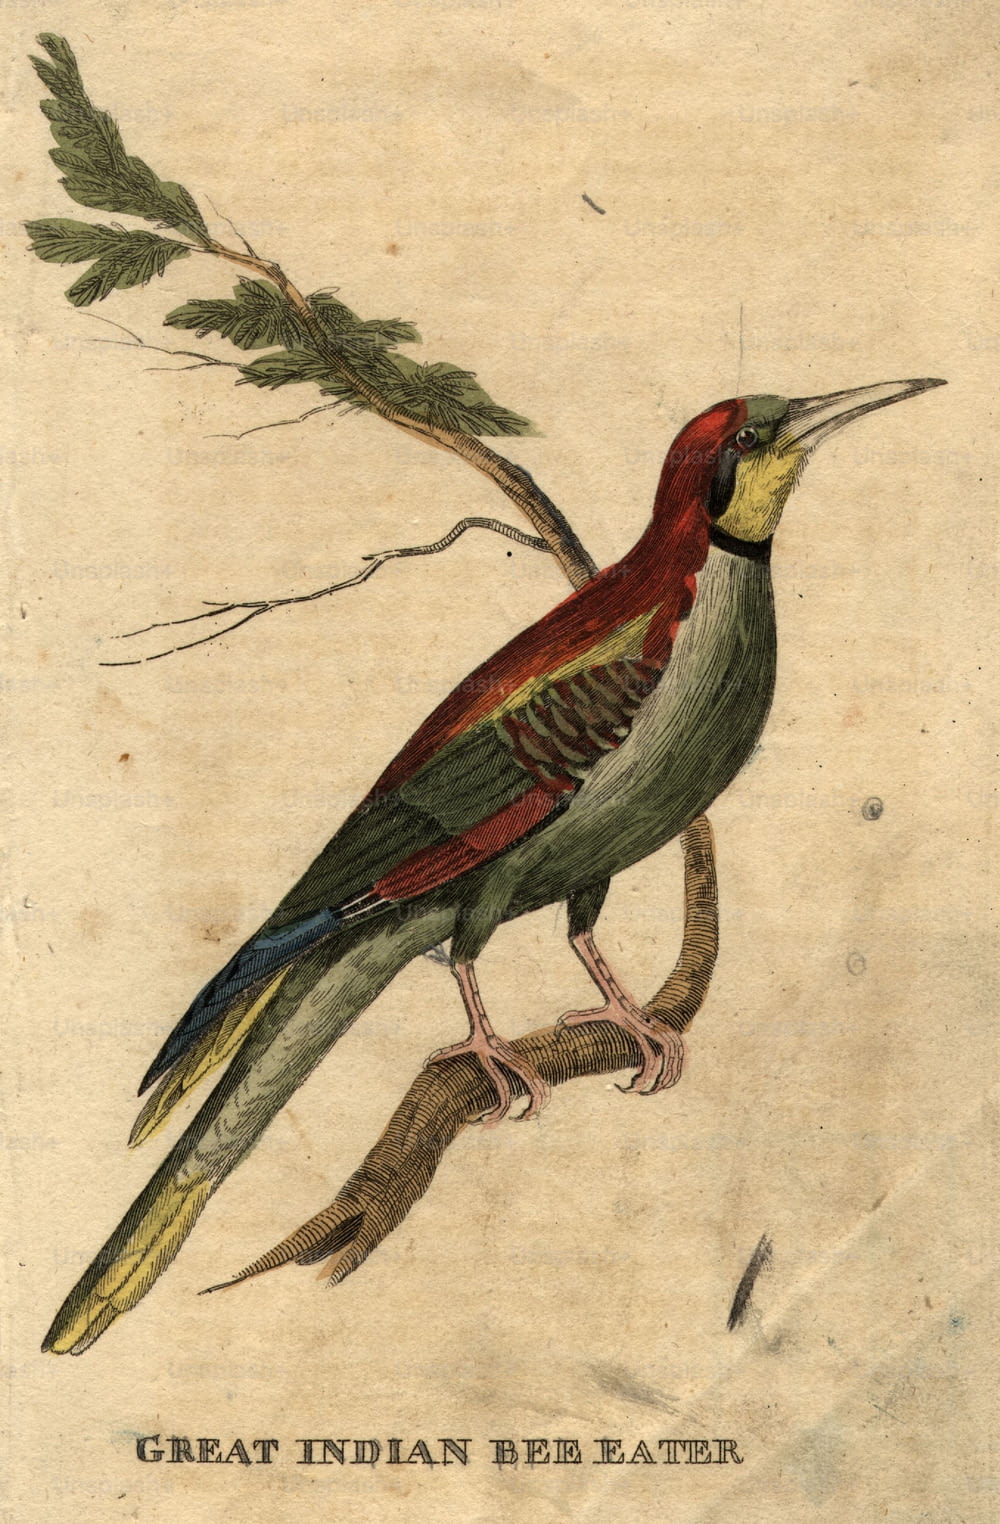 circa 1800:  The Great Indian Bee Eater.  (Photo by Hulton Archive/Getty Images)